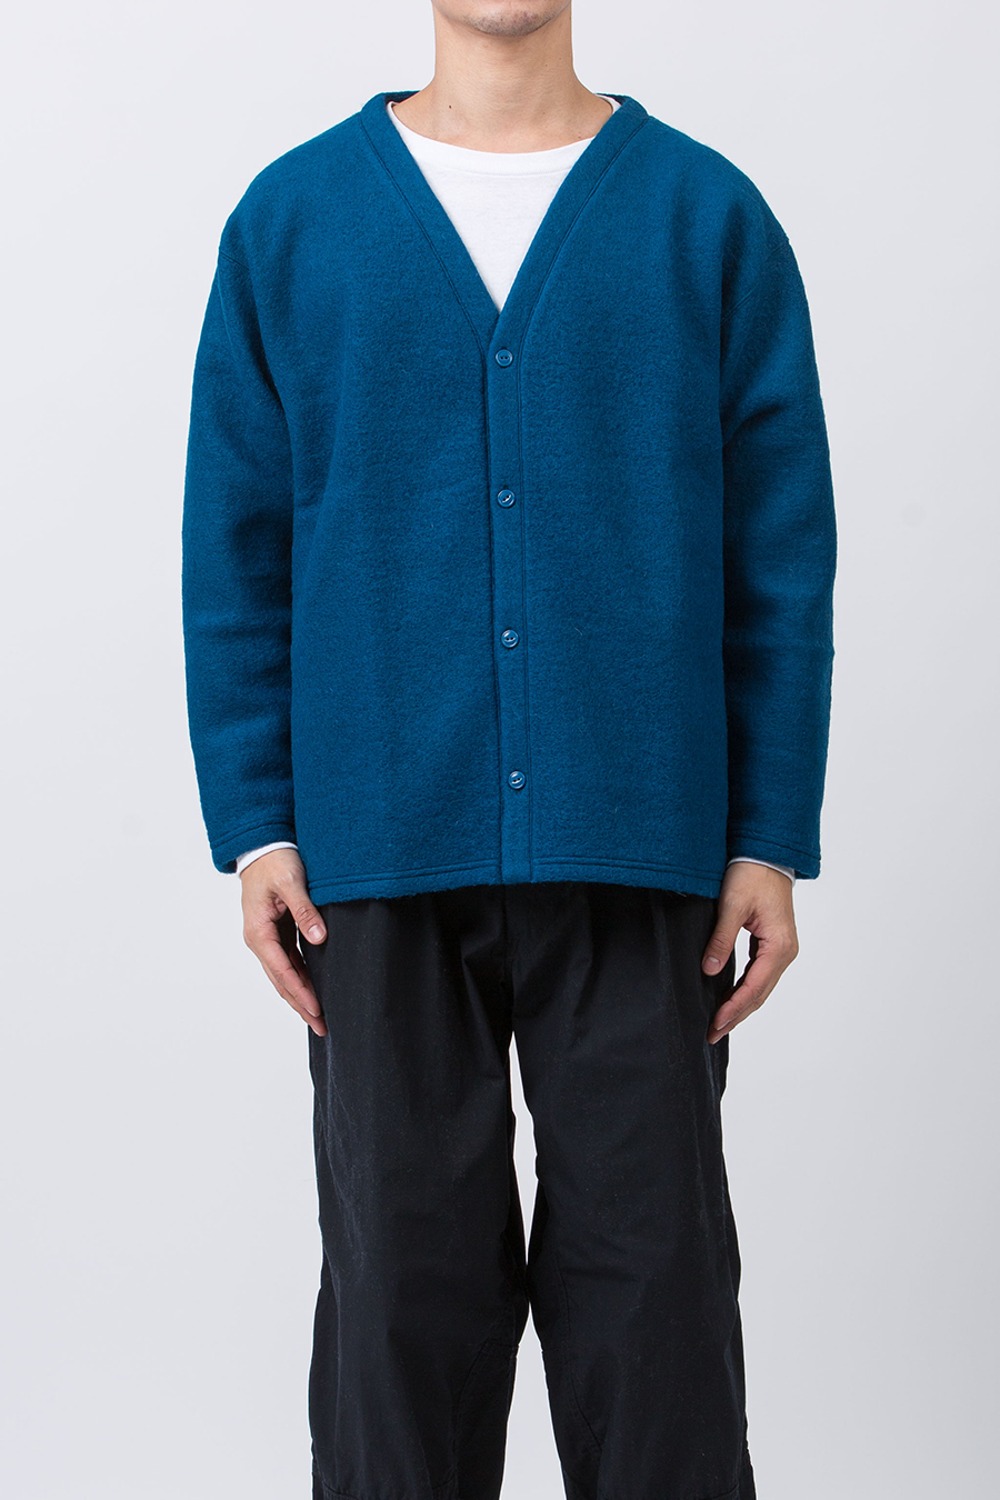 (23FW) SOUTH2 WEST8 S.S. V NECK CARDIGAN - W/PE BOILED JERSEY A-BLUE